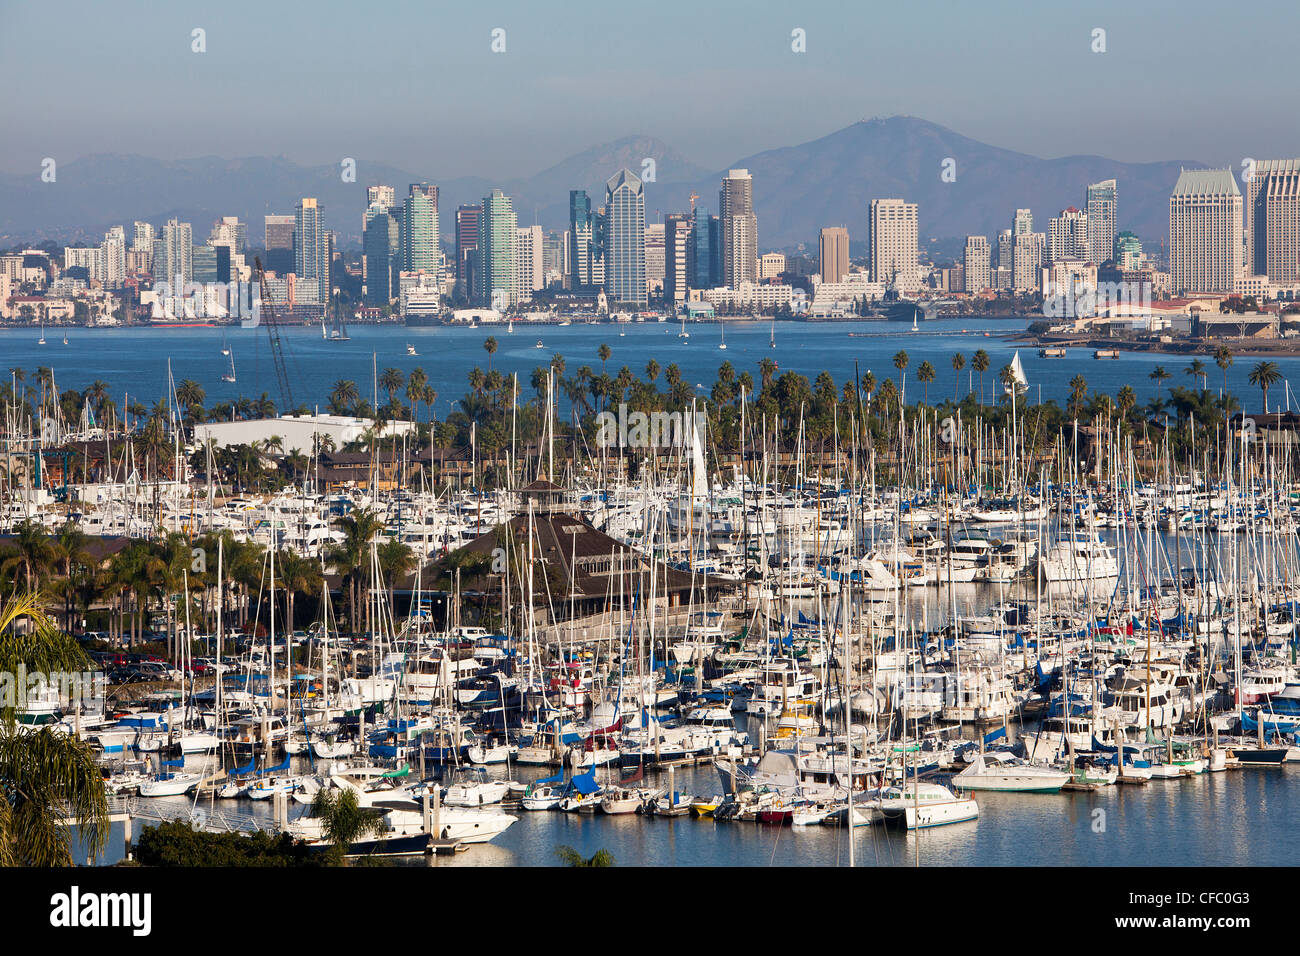 USA, United States, America, California, San Diego, City, Shelter Island, downtown, skyline, architecture, bay, boats, downtown, Stock Photo